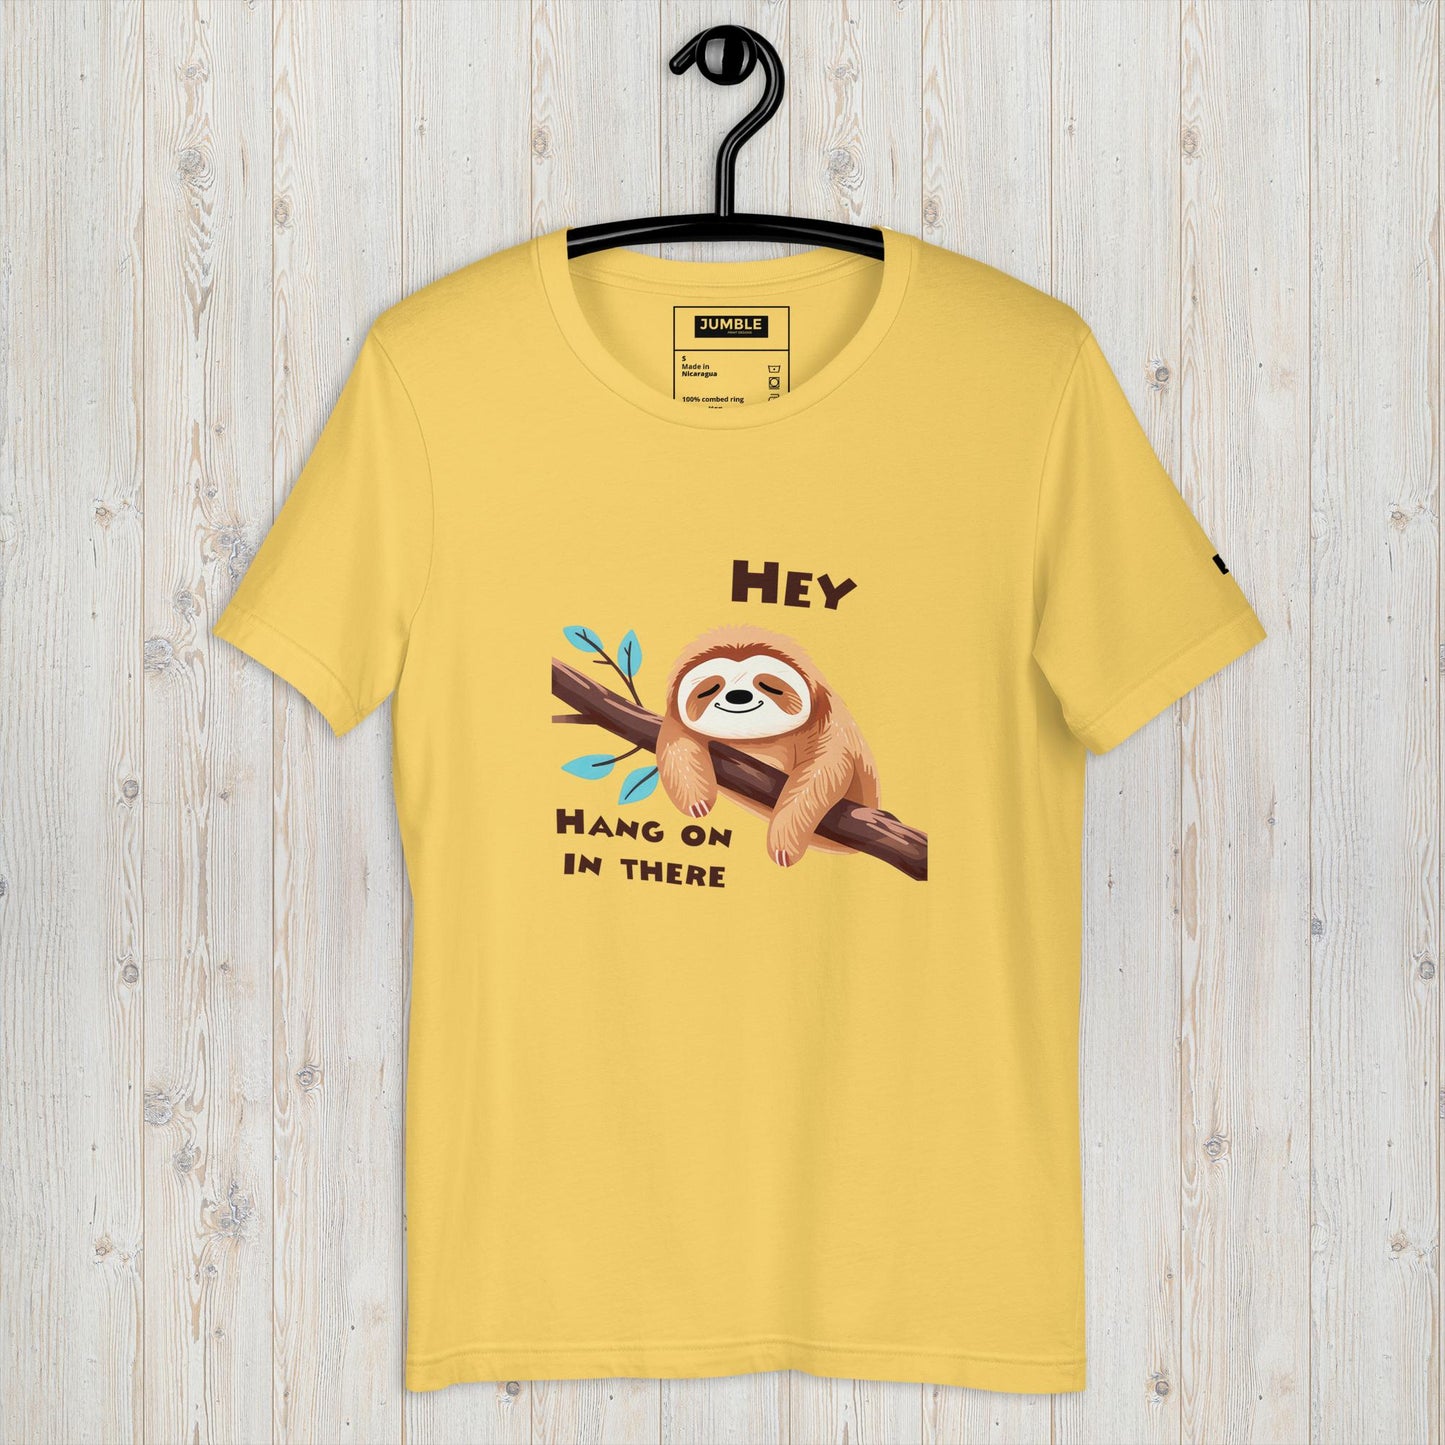 Hey, Hang on in there Unisex t-shirt